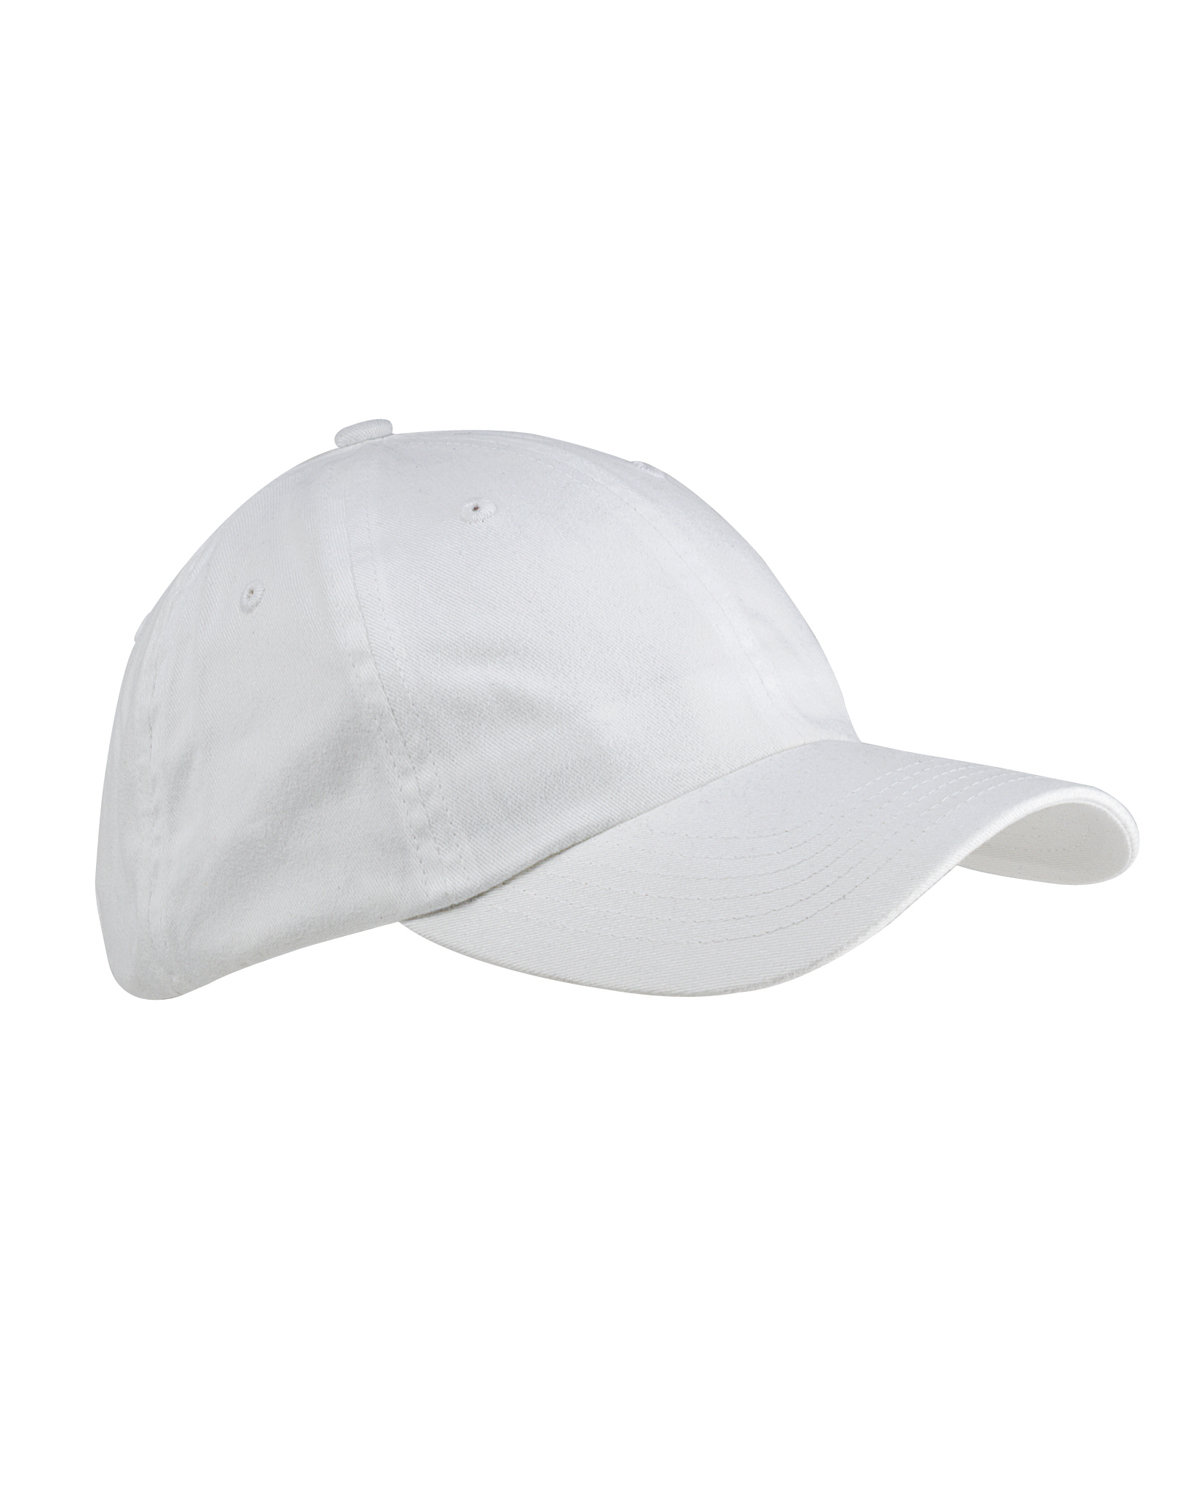 Brushed Twill Unstructured Cap-Big Accessories